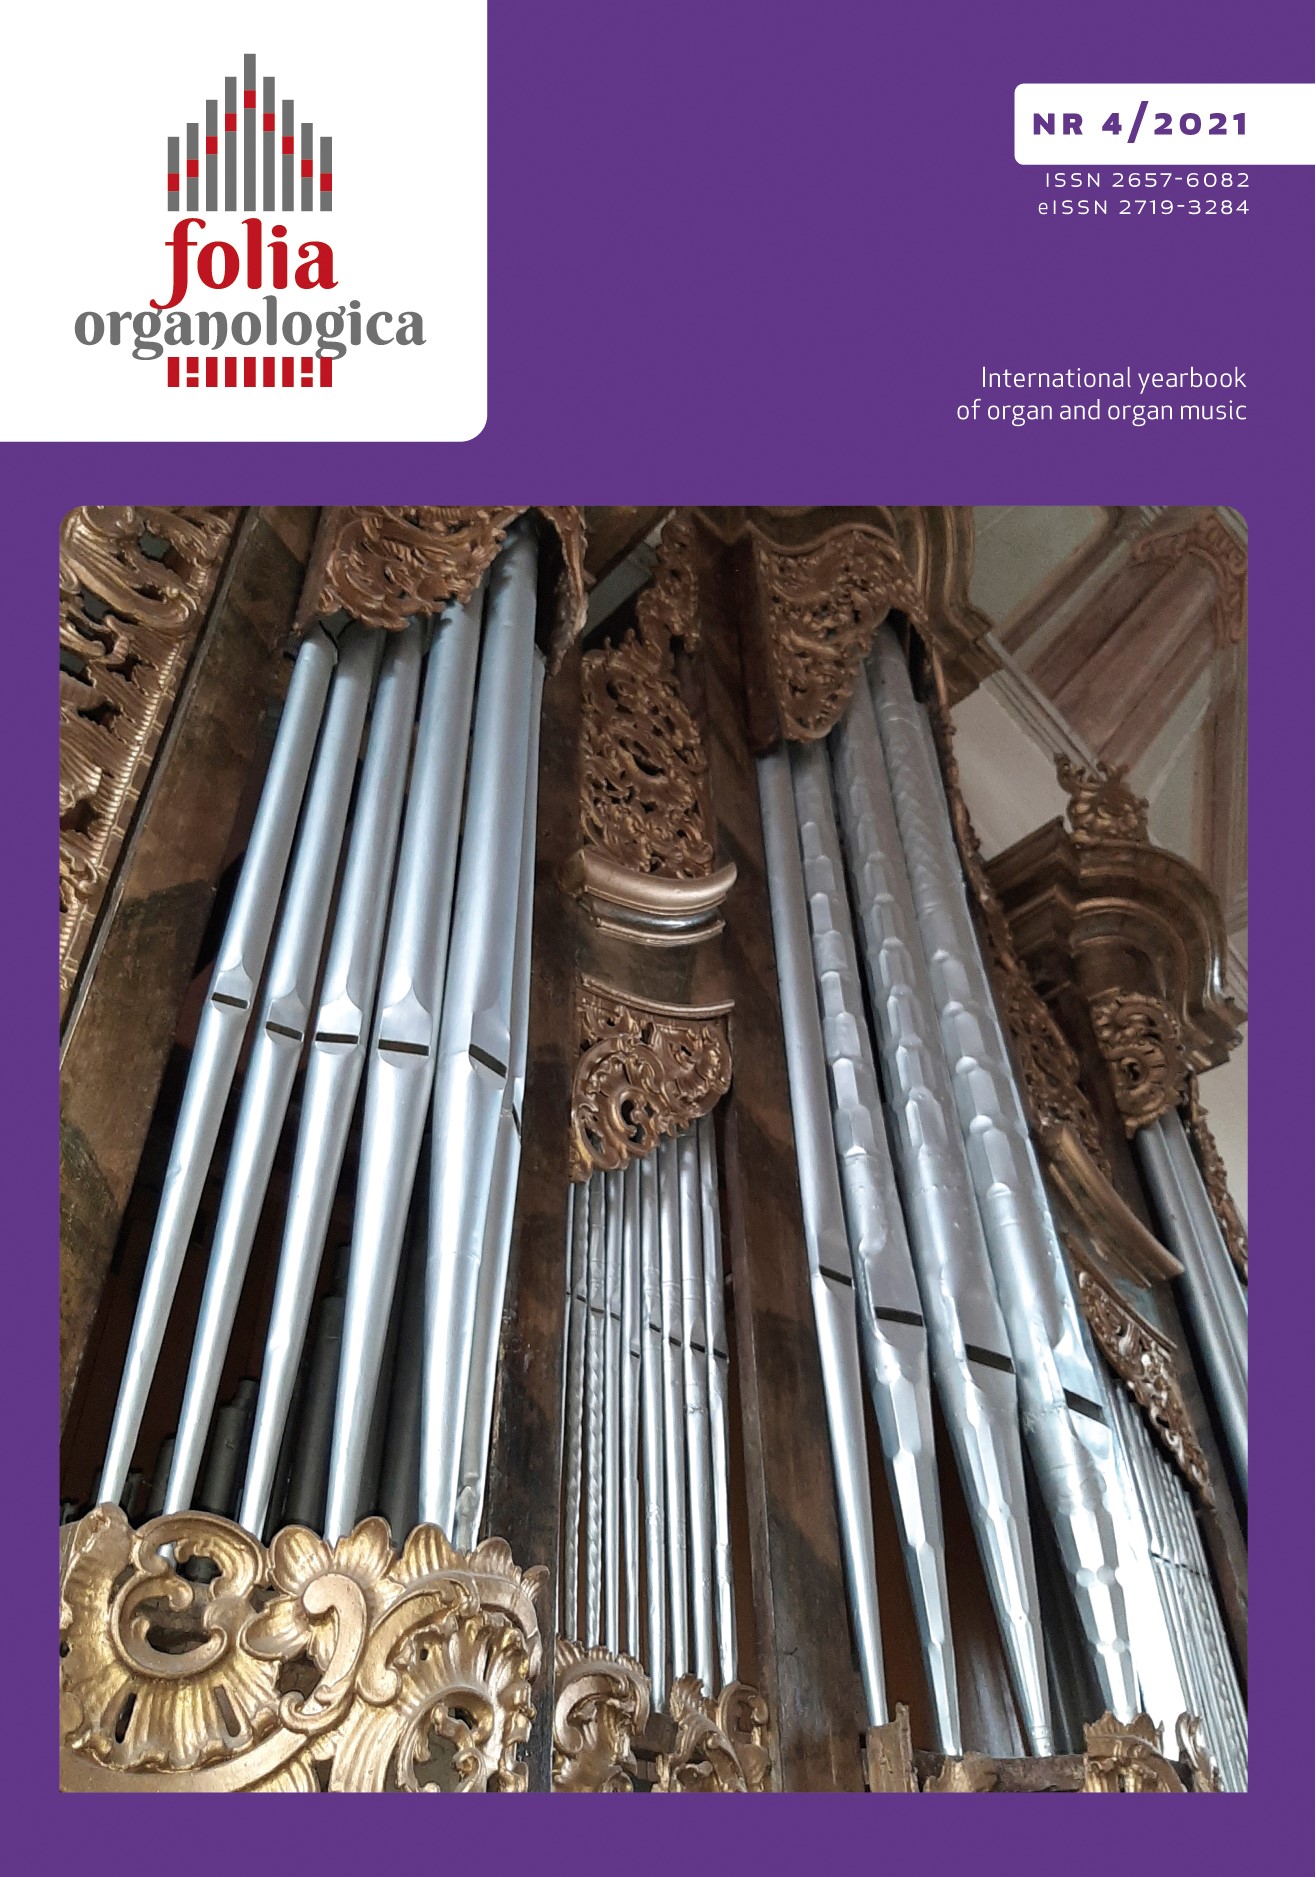 The organs in Opolian Silesia as described in the periodical “Zeitschrift für Instrumentenbau” Cover Image